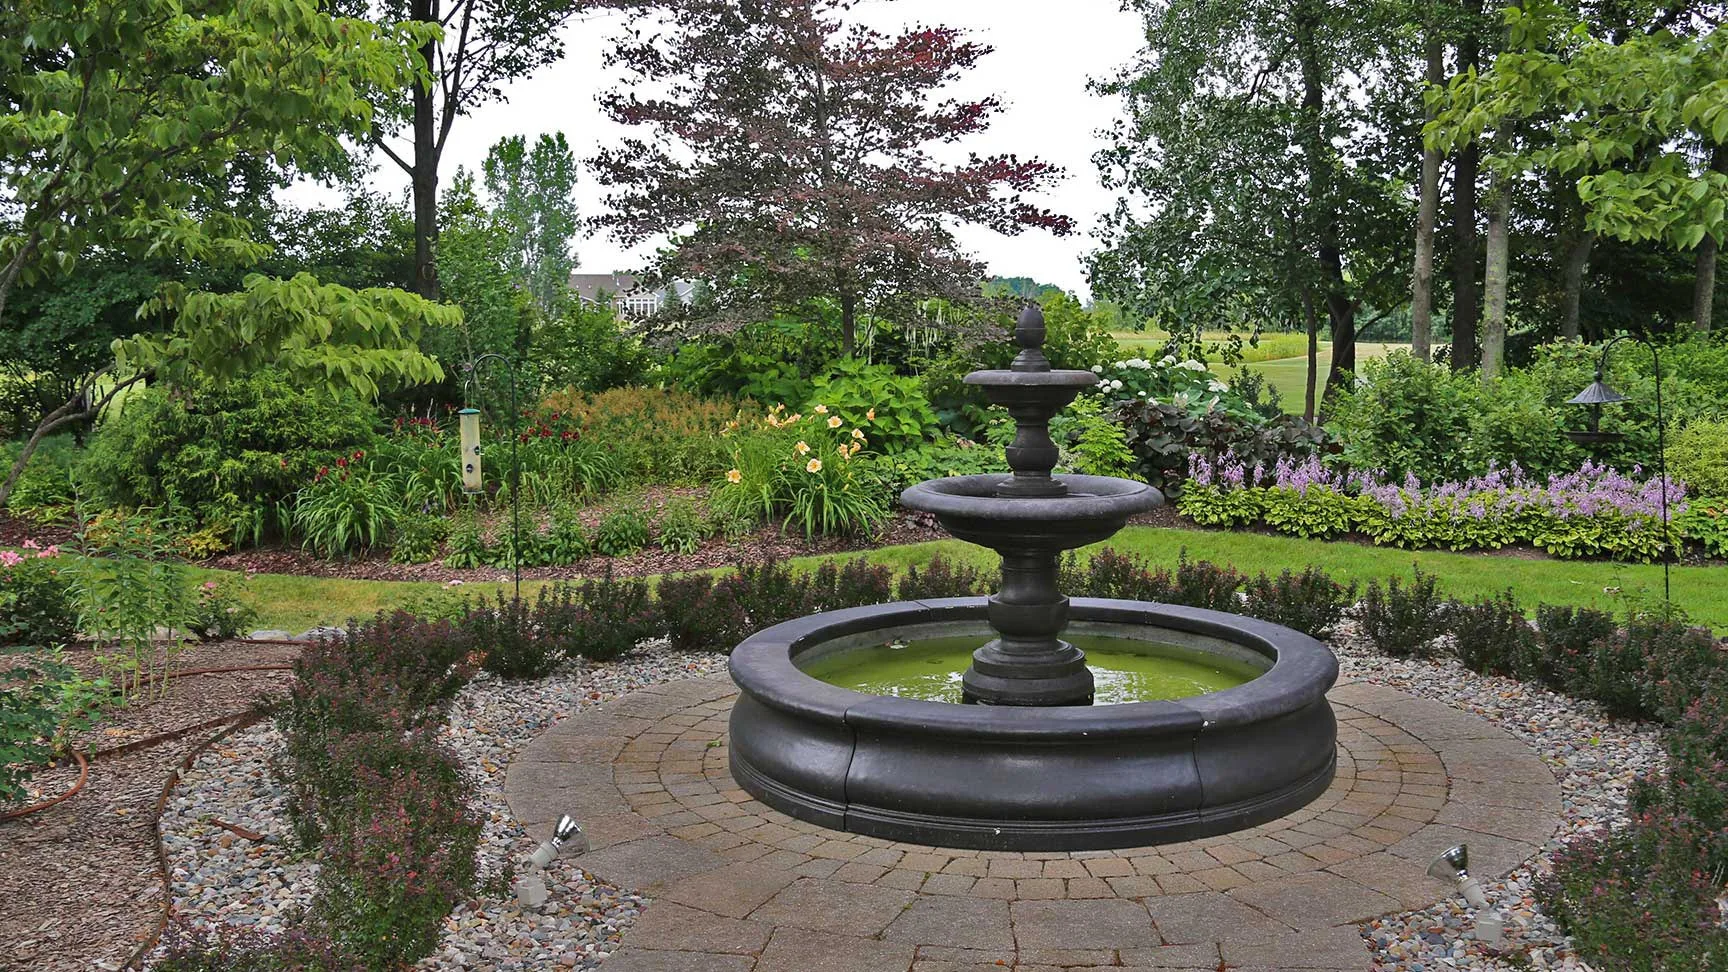 Black water fountain feature surrounded by a paved walkway and foliage in Lansing, MI.